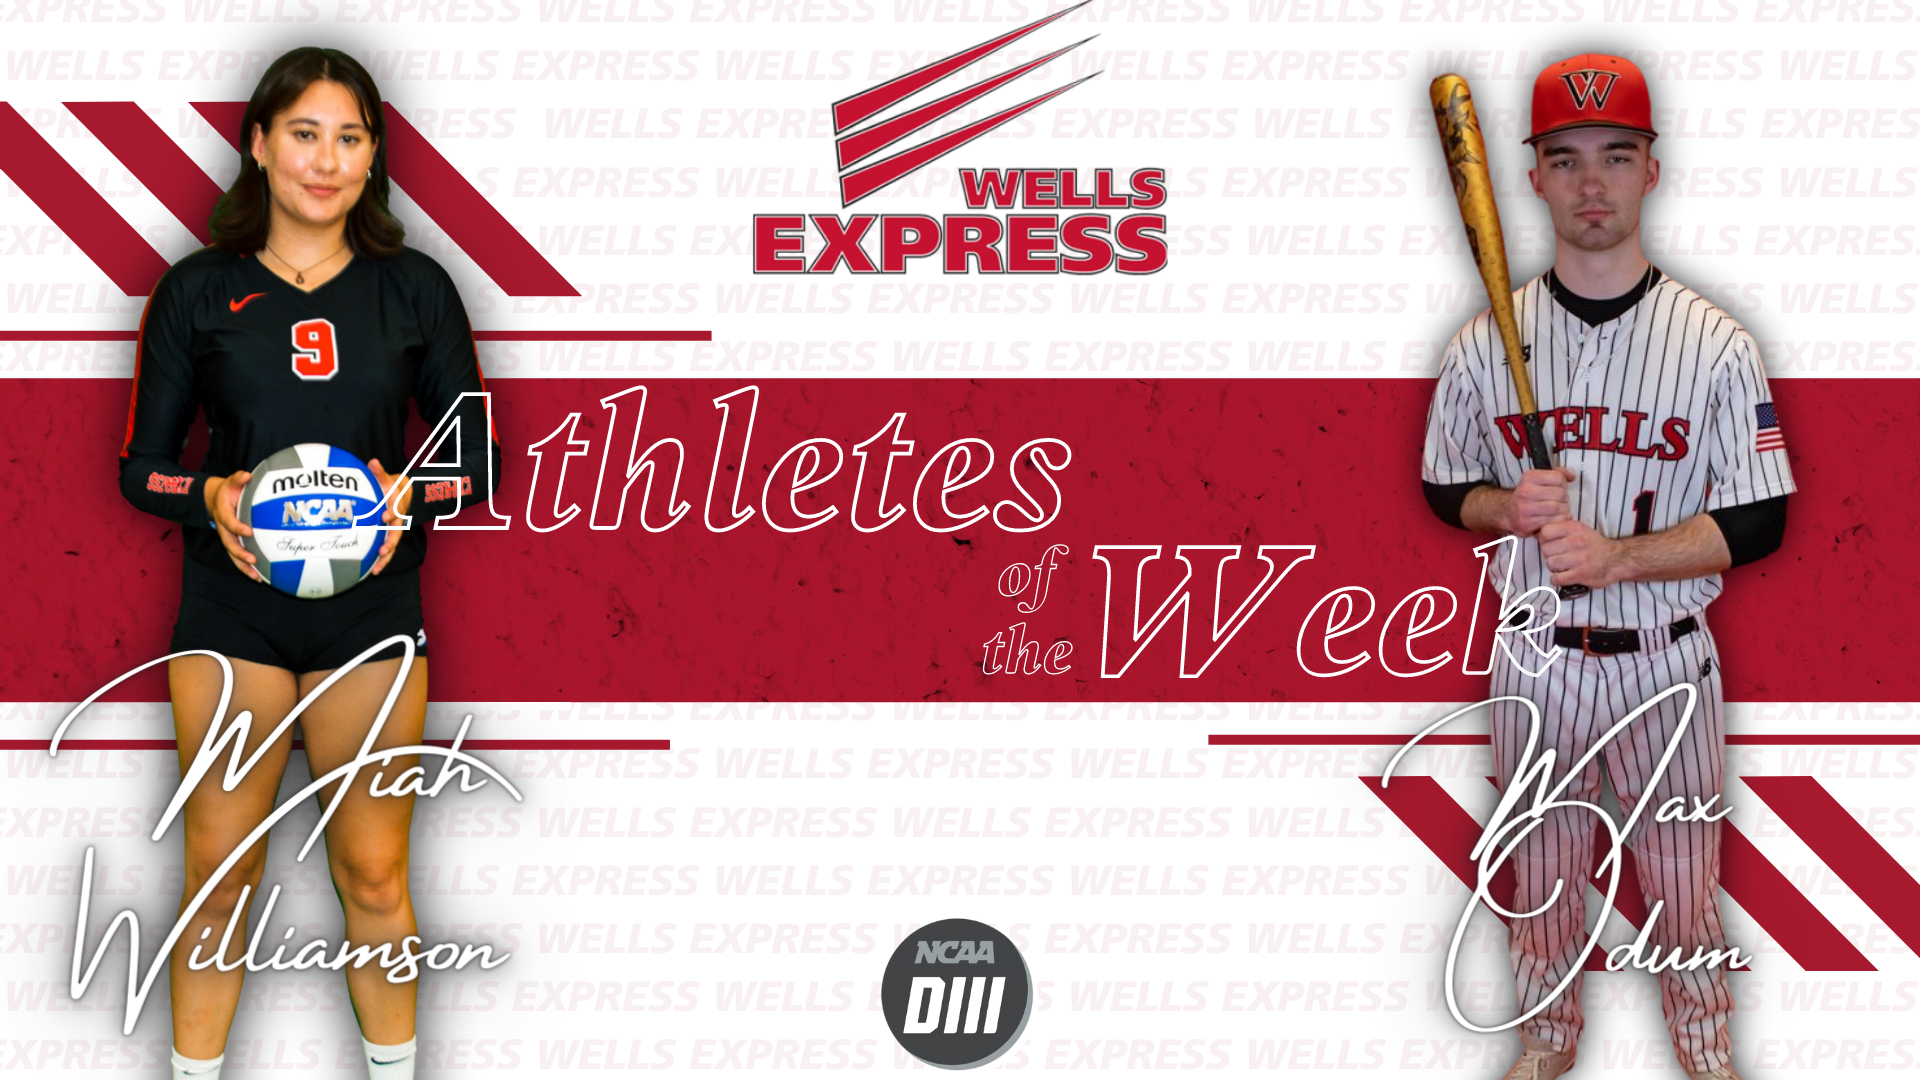 Miah Williamson and Zack odum athletes of the week